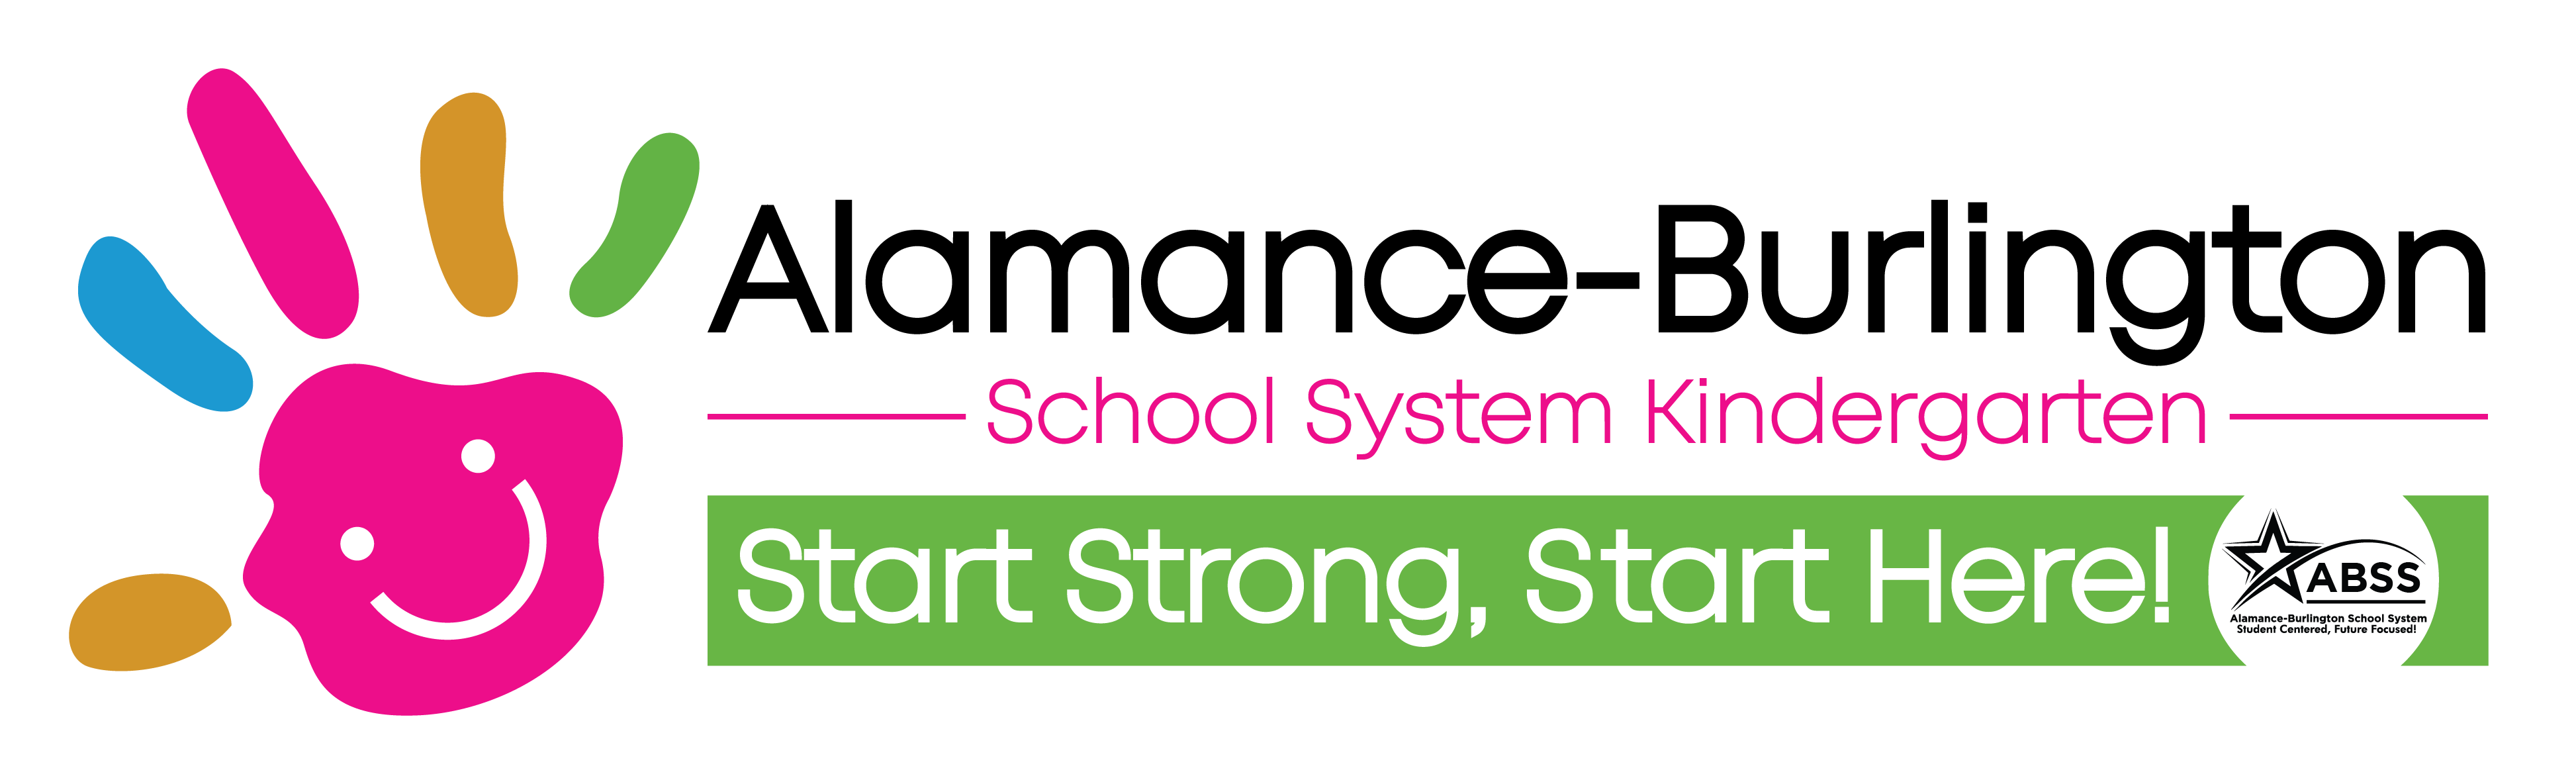 Header image with a pink hand print and yellow, green, and pink fingers with a white smiley face inside.  The text to the right says "Alamance-Burlington School System Kindergarten - Start Strong, Start Here" and the ABSS logo is in the bottom right corner